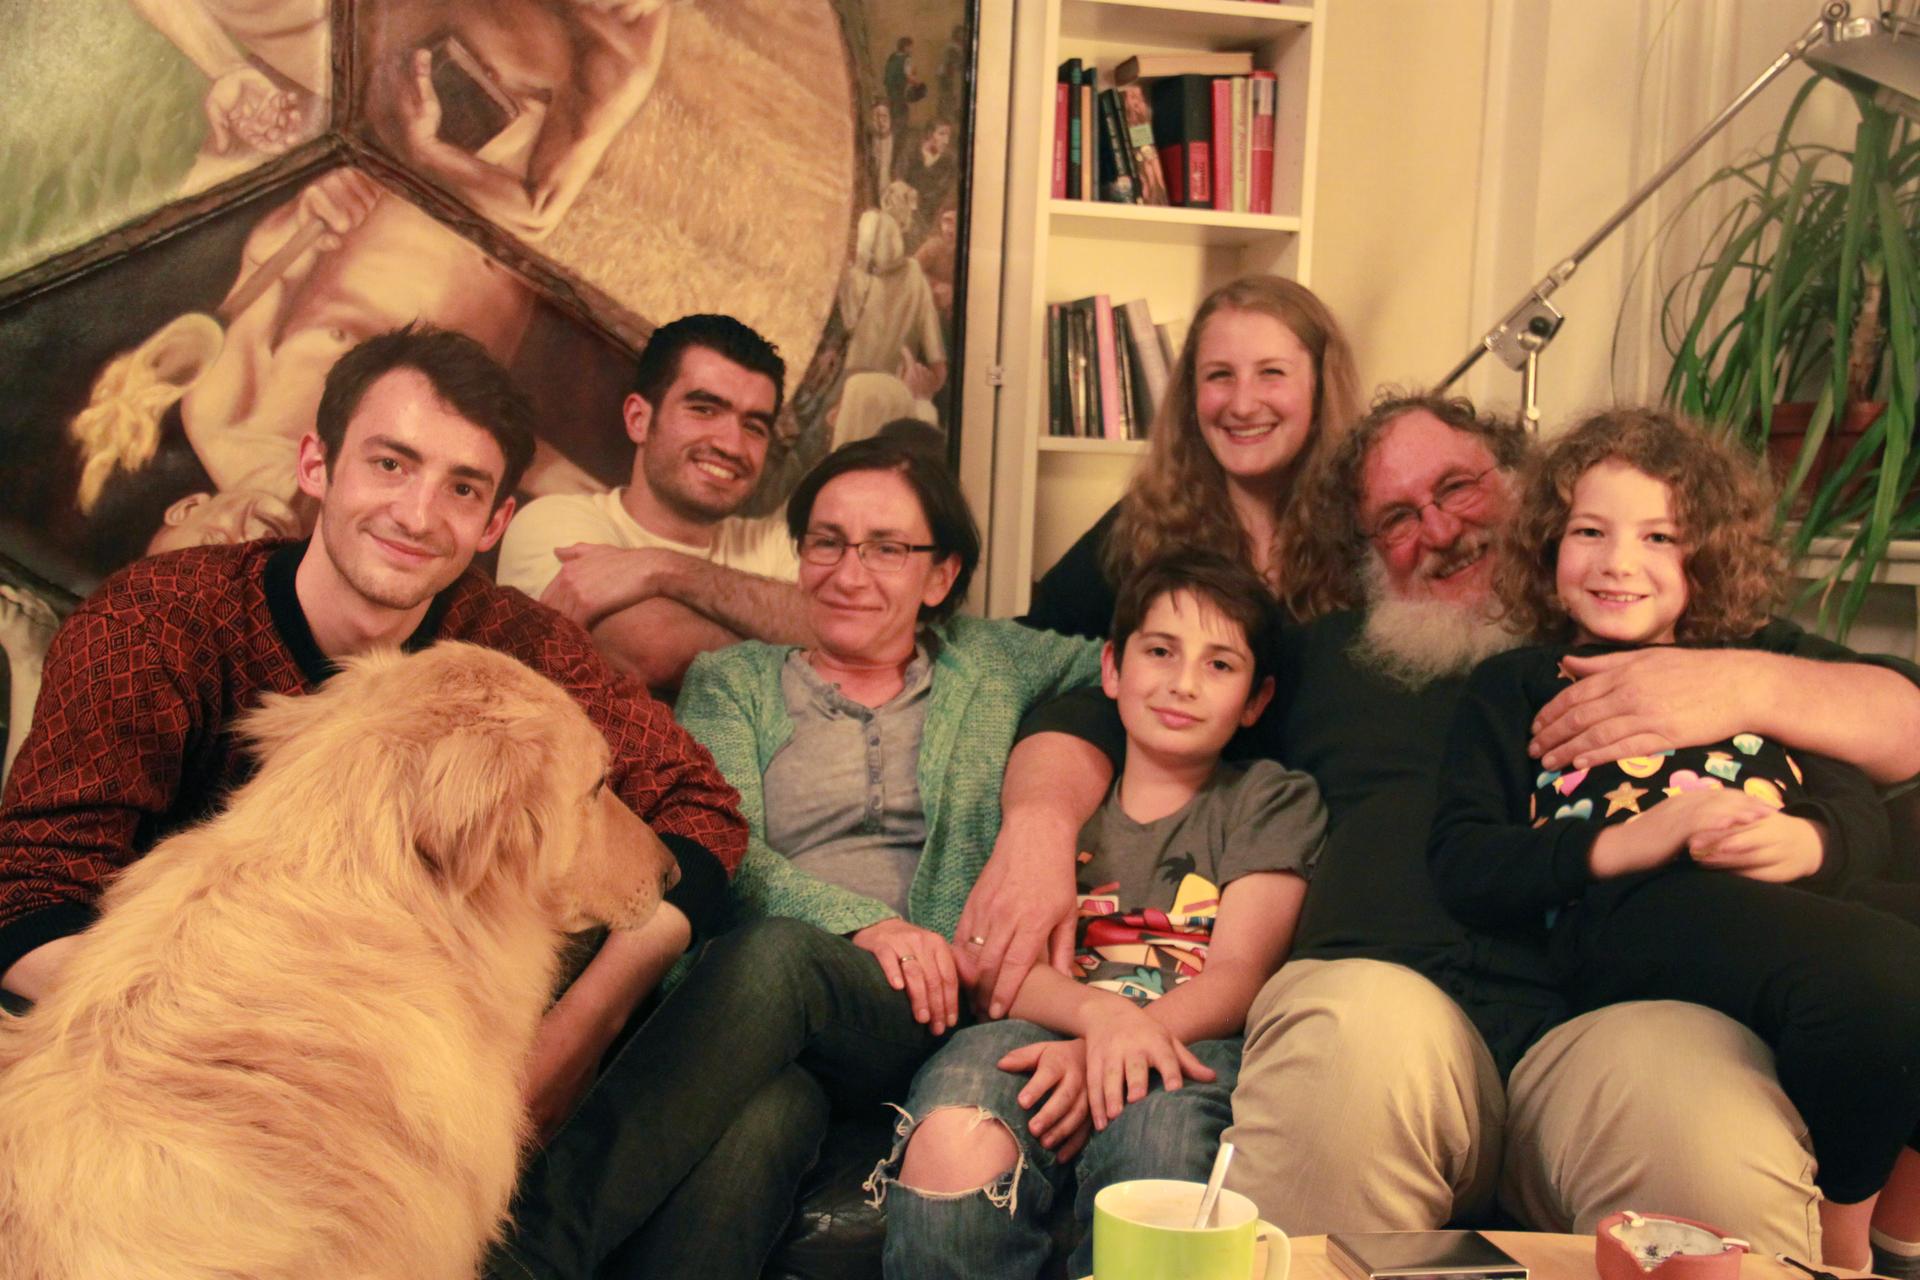 The Jellinek family in their home in Berlin, with their houseguest, Kinan, a Syrian Muslim refugee (second from left). When Chaim Jellinek told Kinan he was Jewish, Kinan said he had no problem with that.